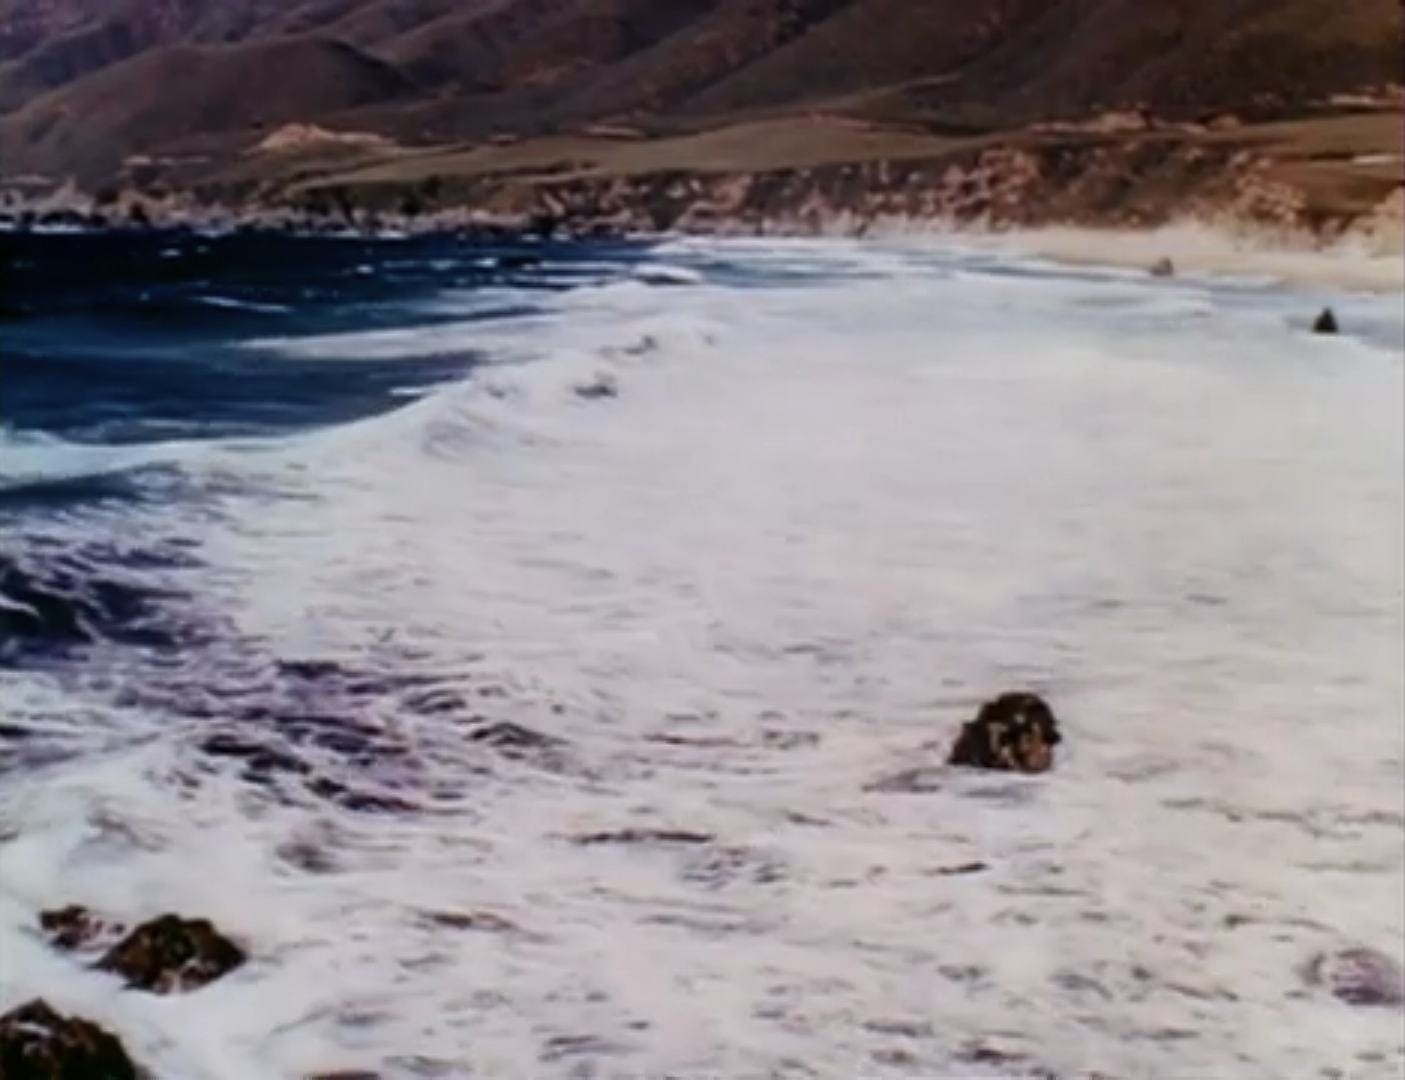 A scene from “The sea around us” (1953)